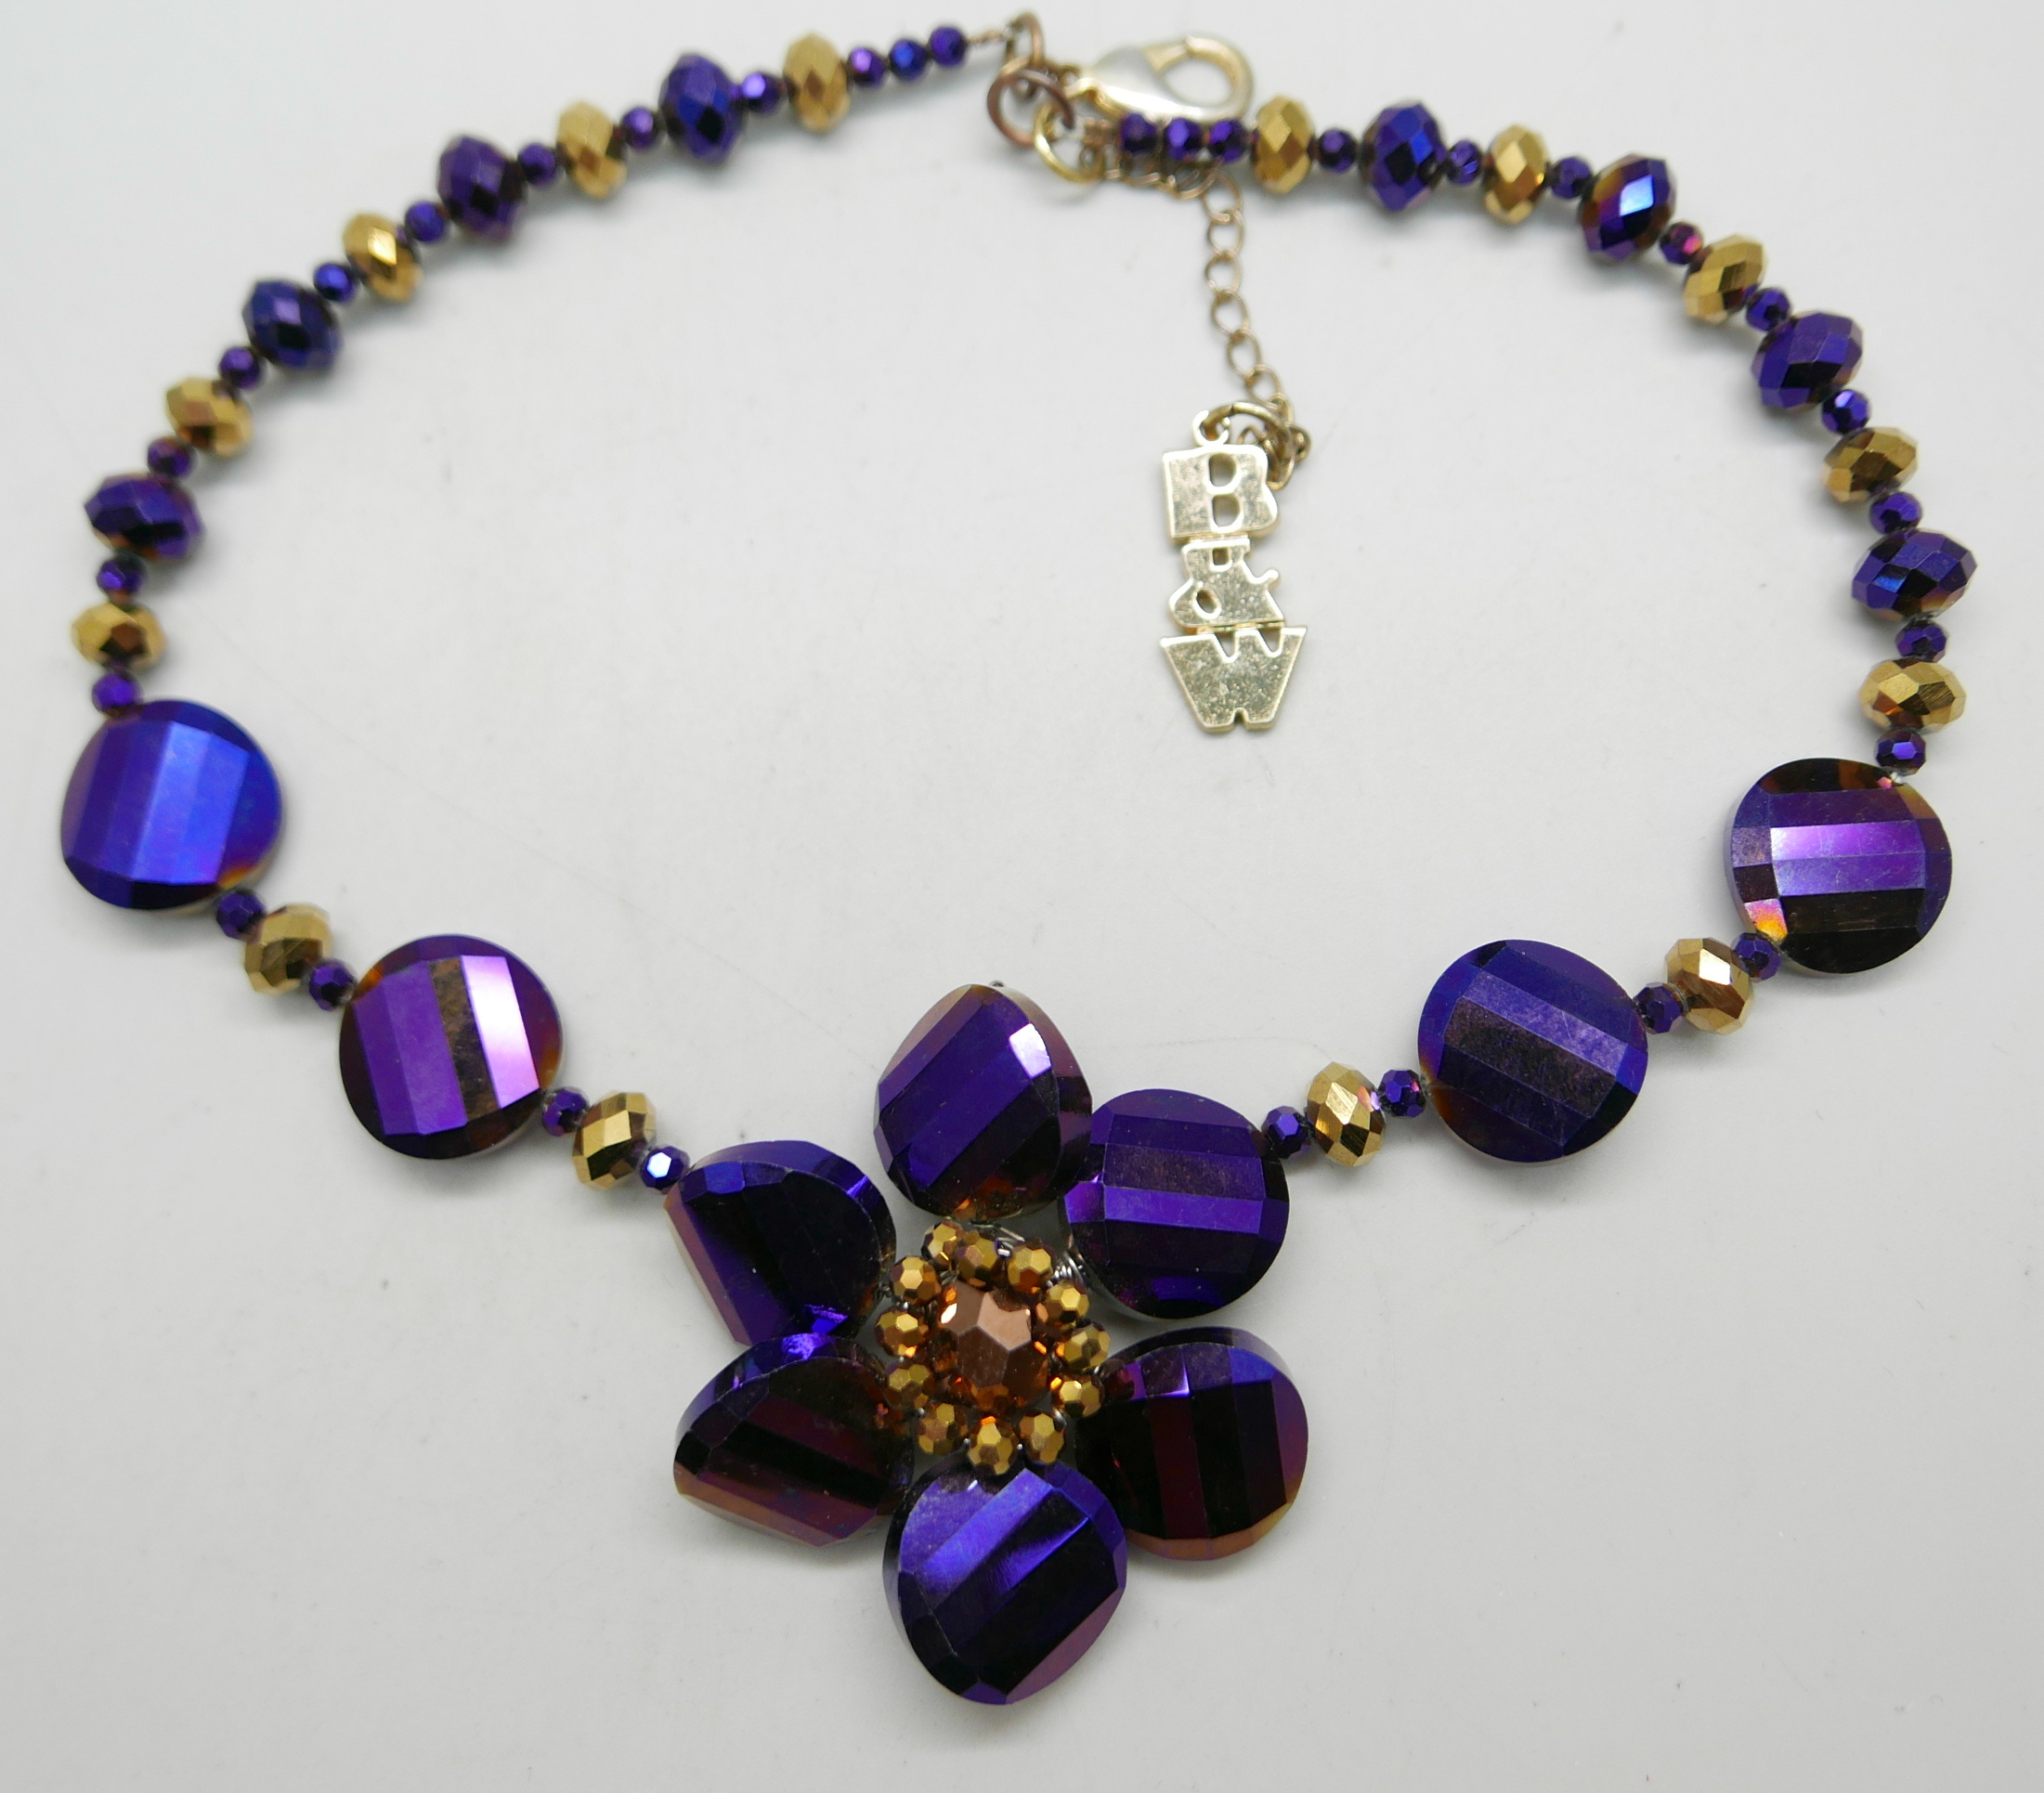 A Butler and Wilson Purple and Gold necklace and a Joules rhinestone three flower necklace - Image 2 of 3